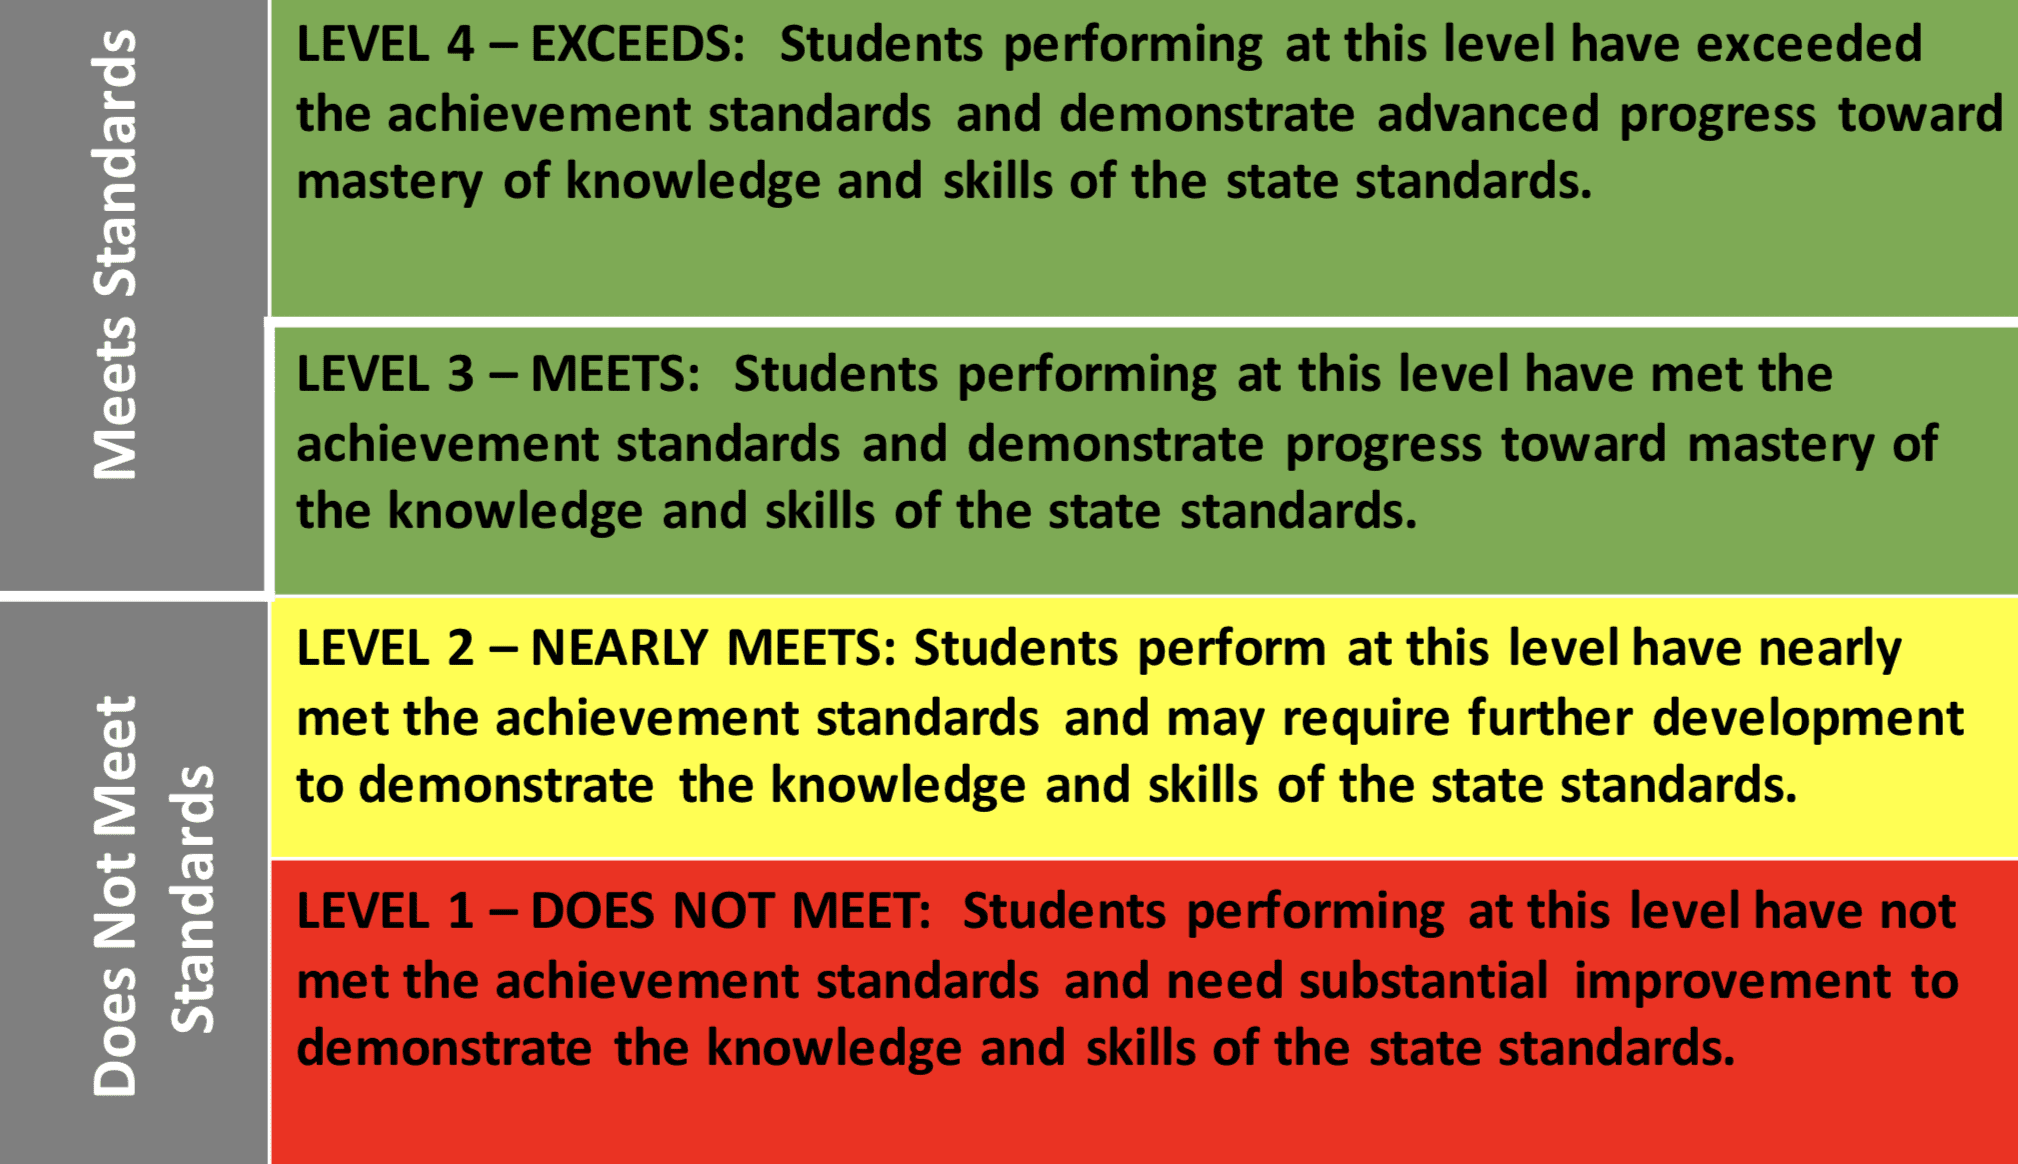 Test scores are categorized into these four achievement levels.